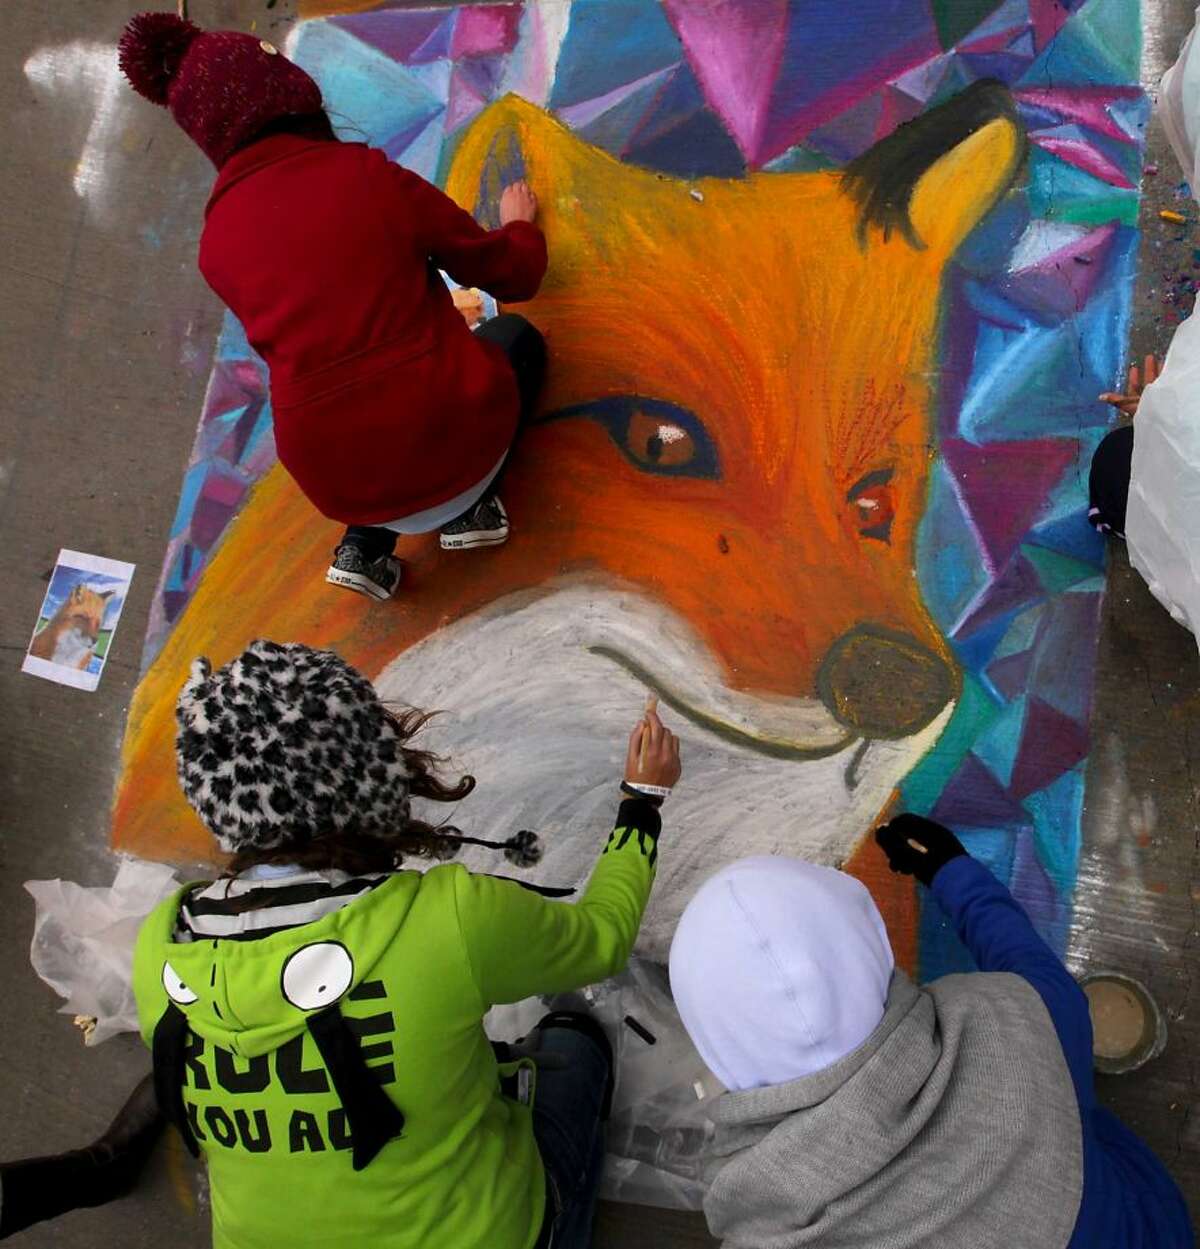 Artists from all over the world will descend upon downtown Houston this weekend to paint the streets a myriad of colors, as the Via Colori Festival returns for its 14th year.